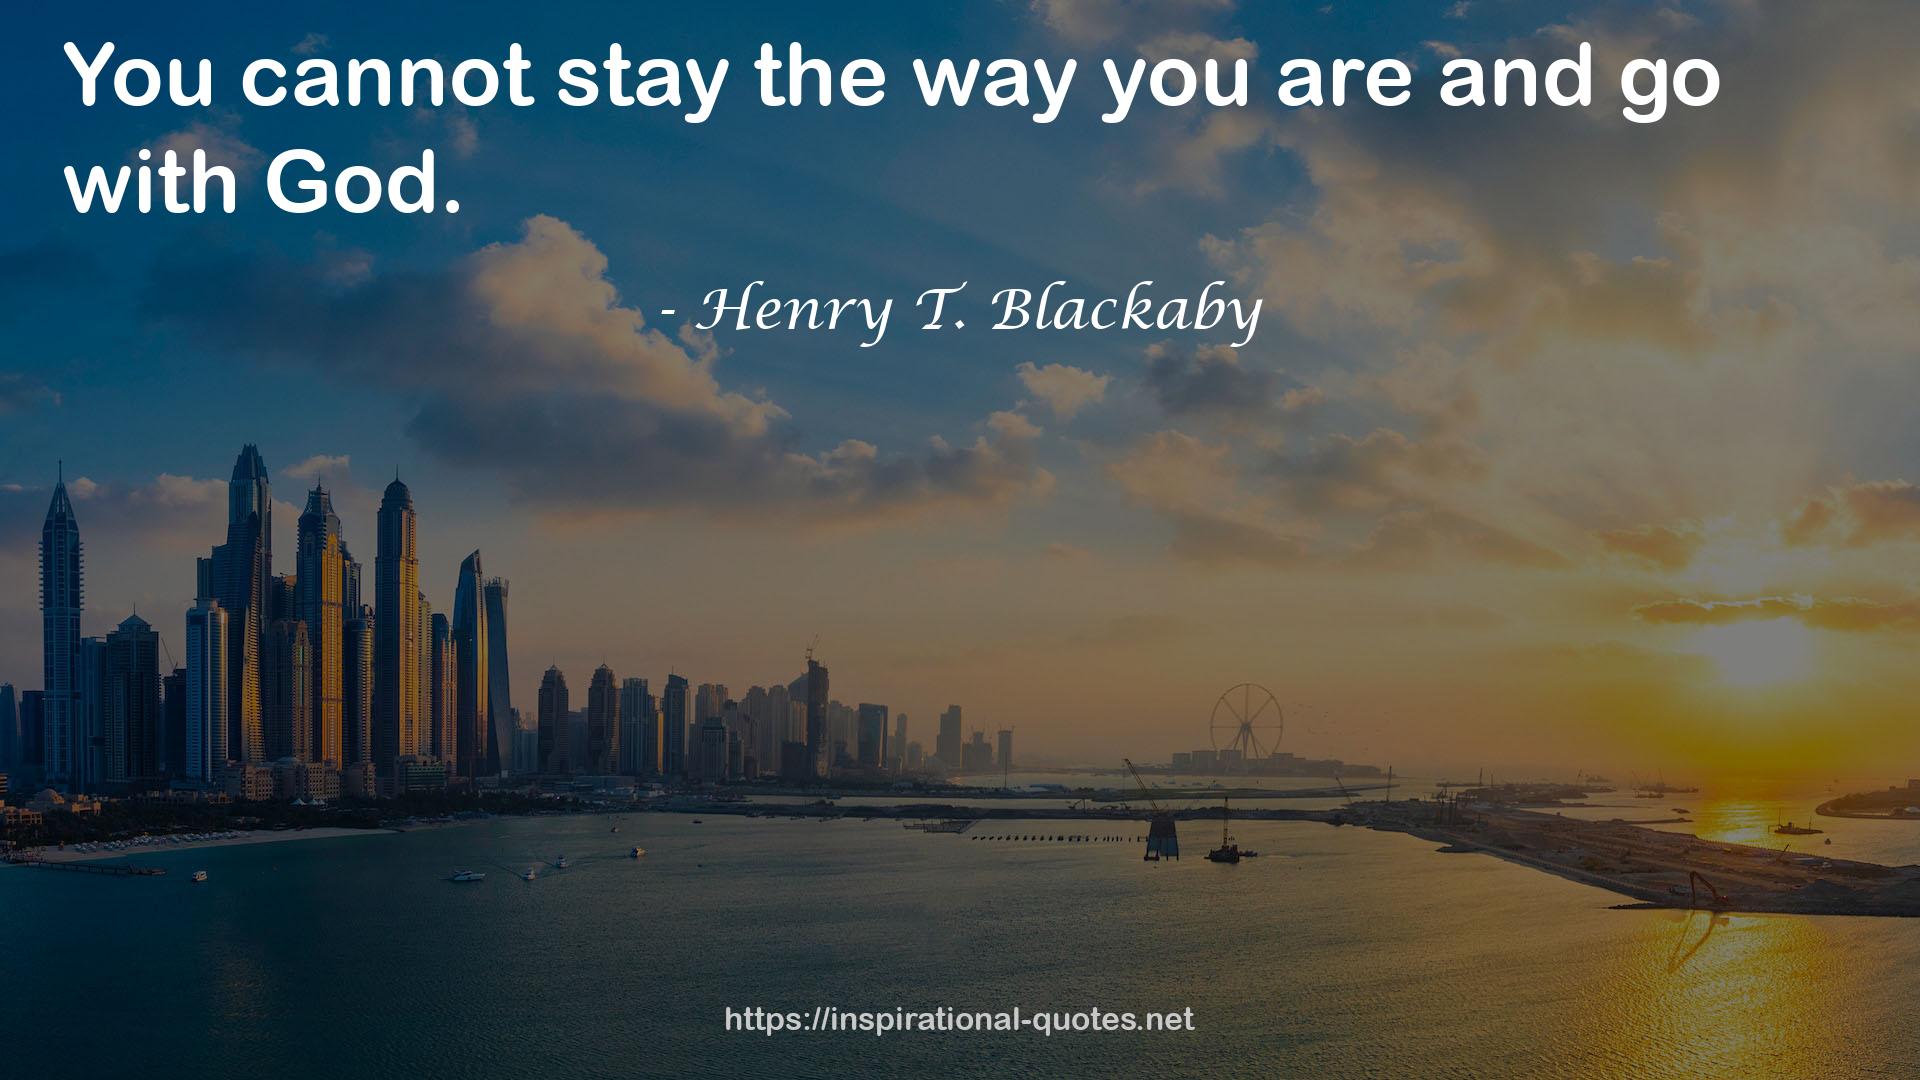 Henry T. Blackaby QUOTES